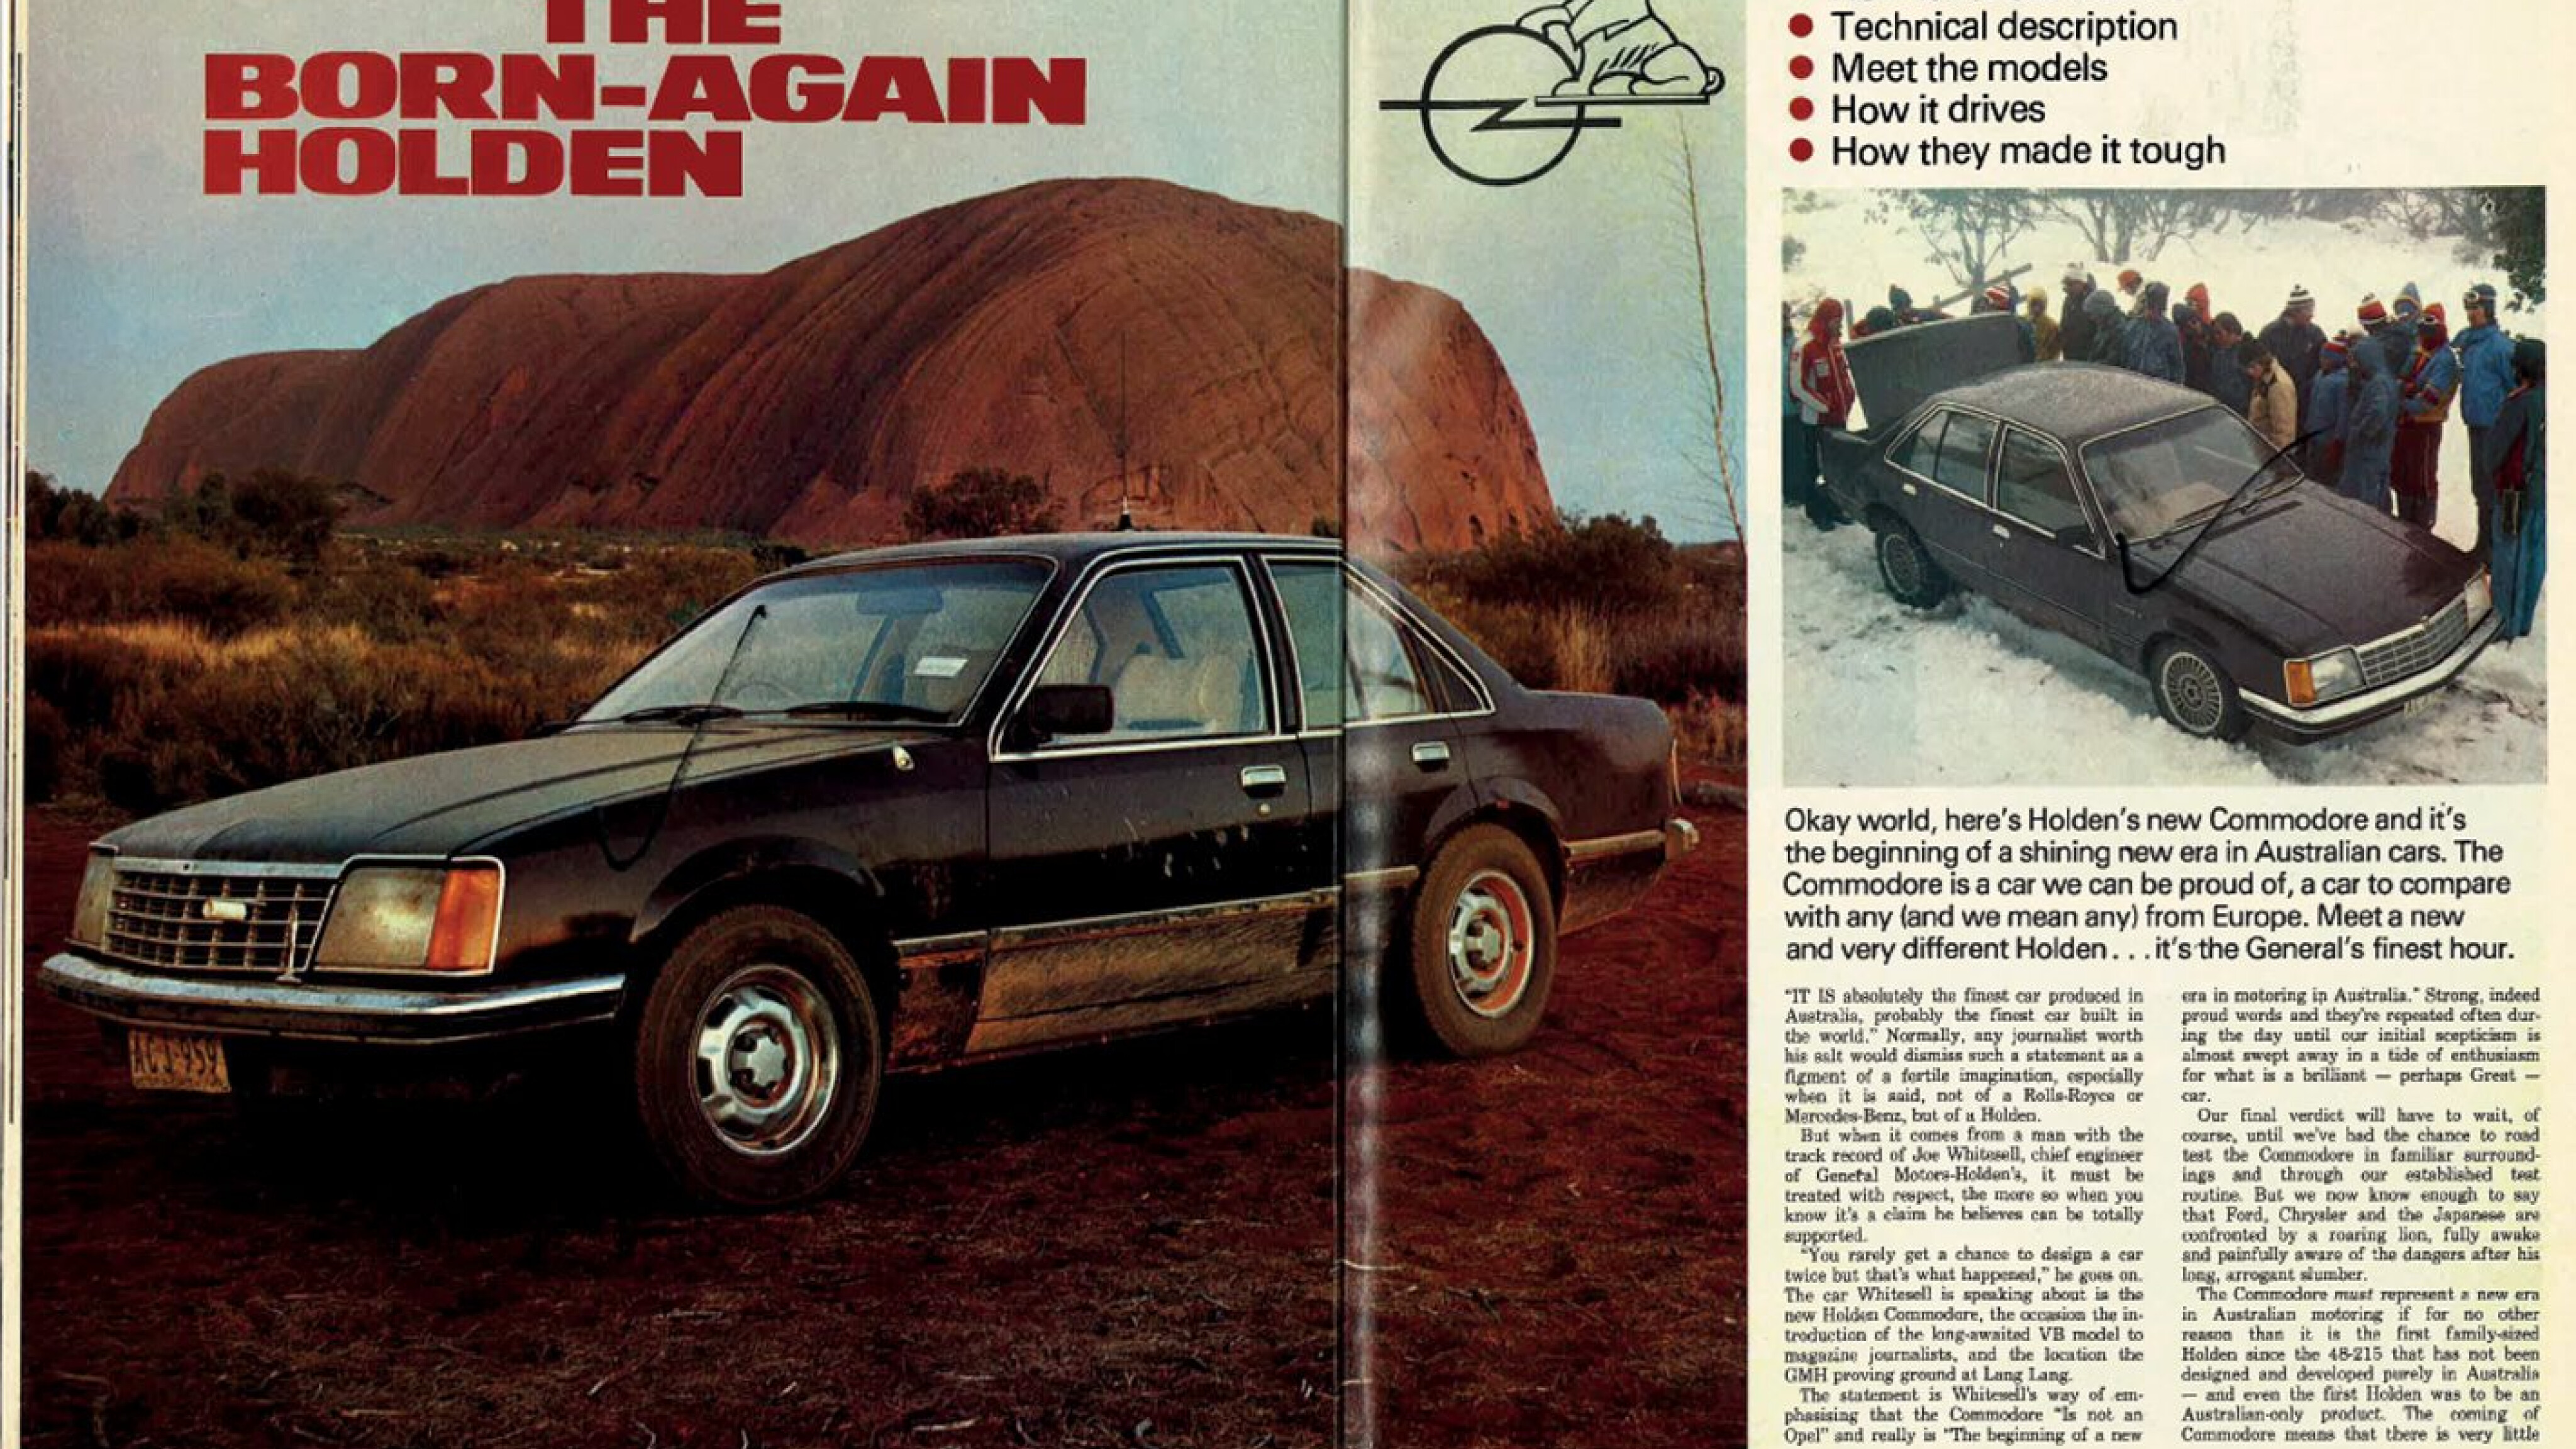 39 Years of Holden Commodore: 1978 - GMH unveils the born-again Holden